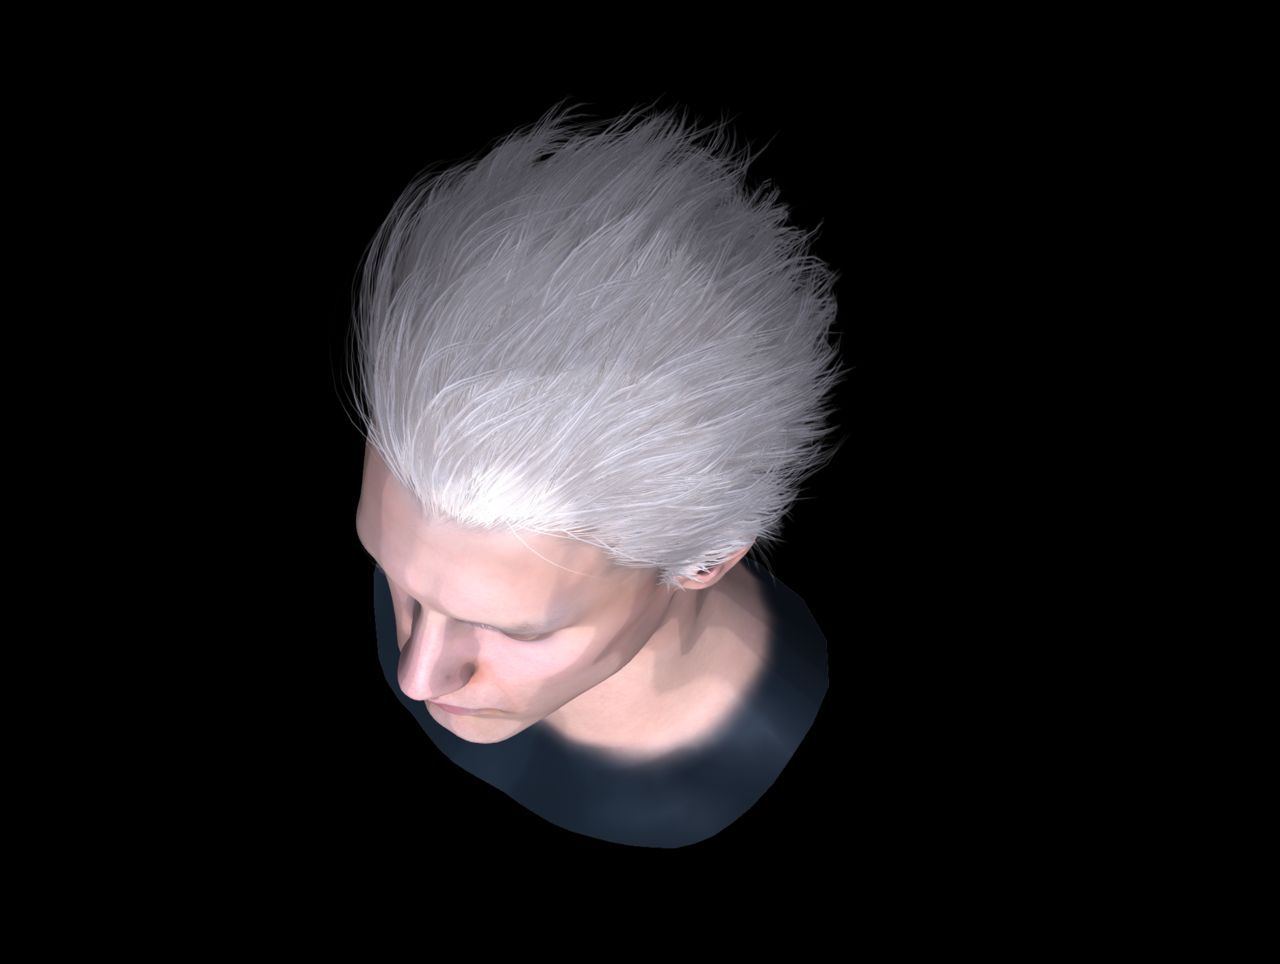 [J.A.] DMC5 | Vergil Head Reference PNG 47